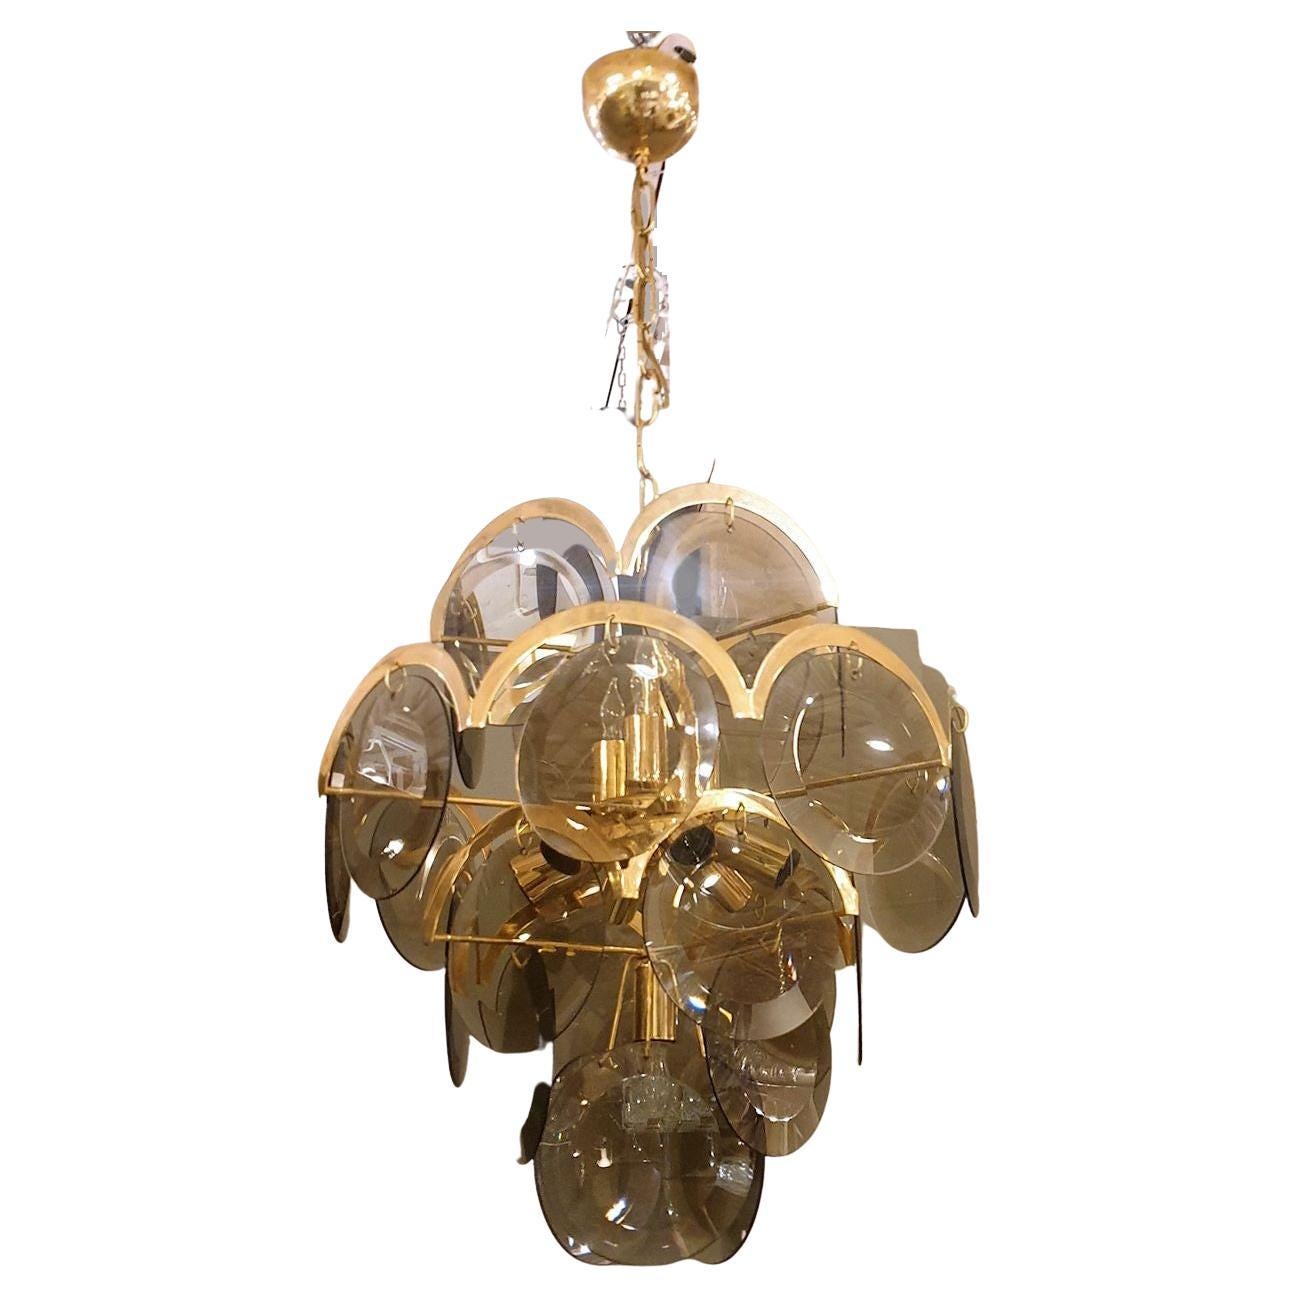 Mid-Century Modern discs Murano glass chandelier, by Vistosi Italy 1970s.
The vintage chandelier is made of smoked Murano glass discs over a brass frame.
It has 10 lights and is rewired for the US.
In very good condition.
Height of glass only: